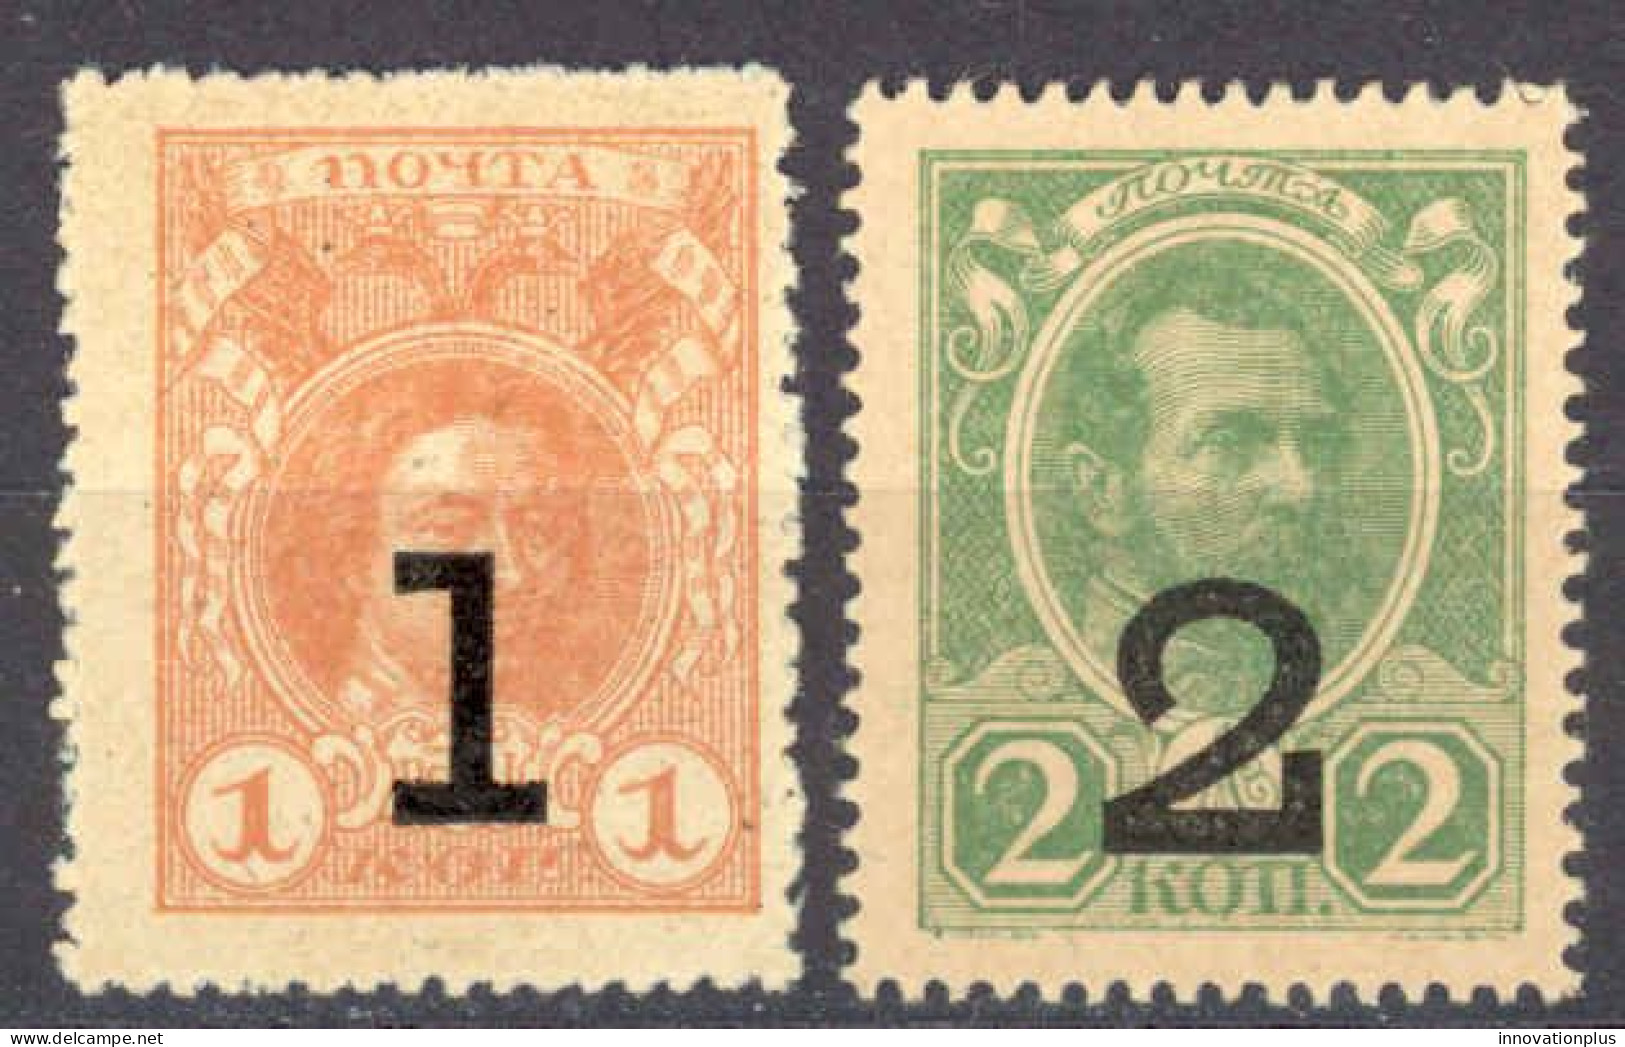 Russia Sc# 112-113 MH (b) 1917 Surcharged Nicholas II - Unused Stamps